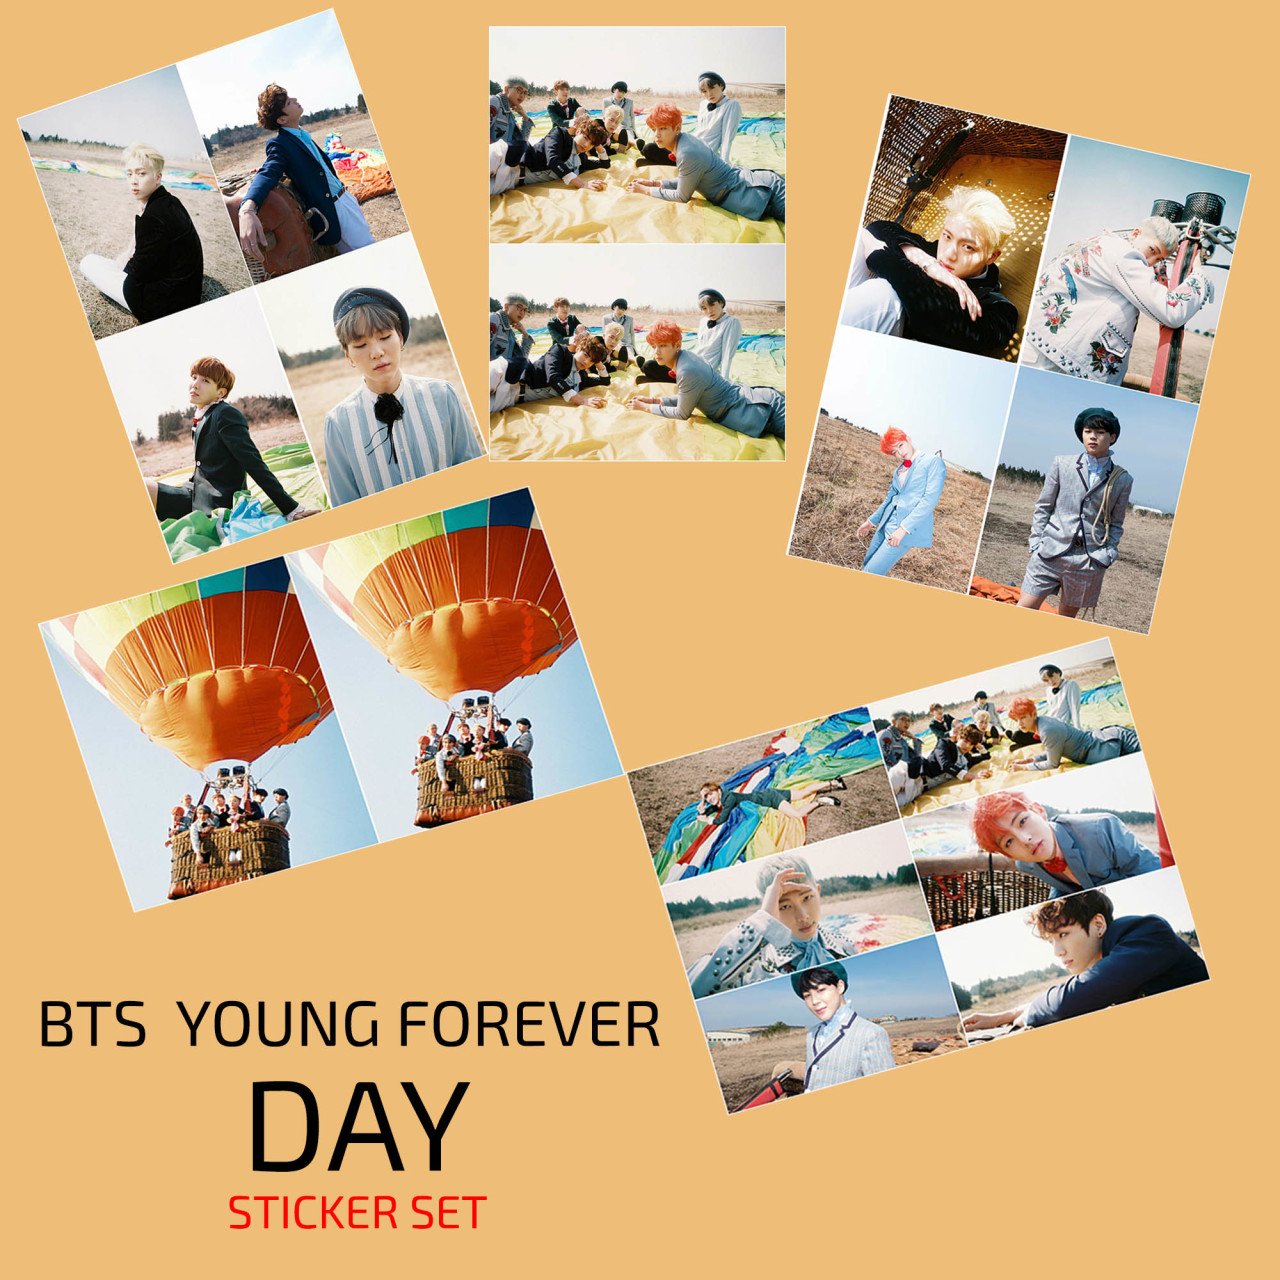 BTS YOUNG FOREVER DAY STİCKER SET